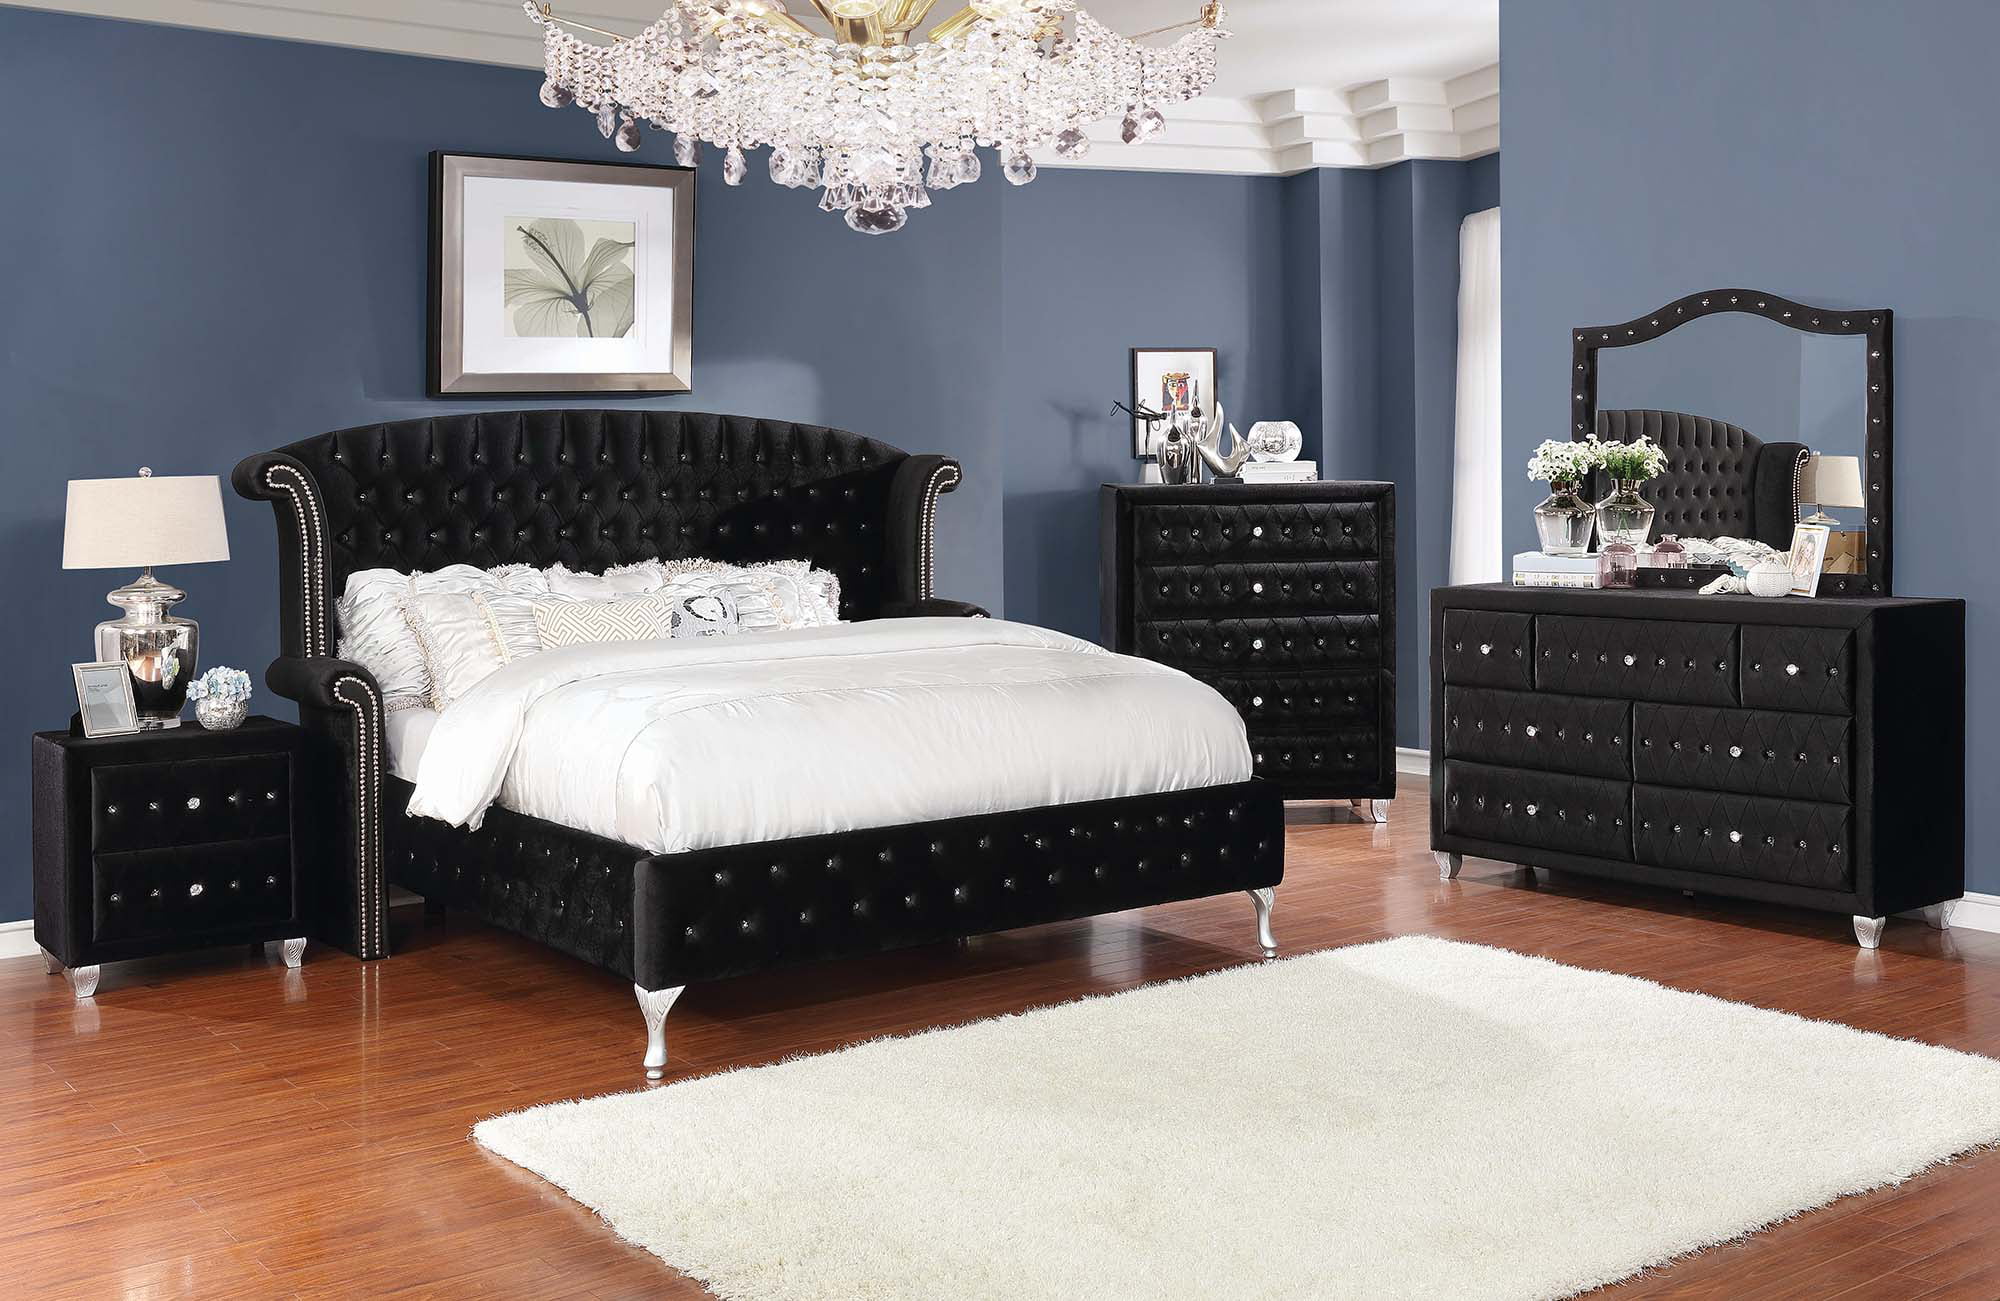 Coaster Deanna Tufted Upholstered Queen, Black Upholstered Sleigh Bed Queen